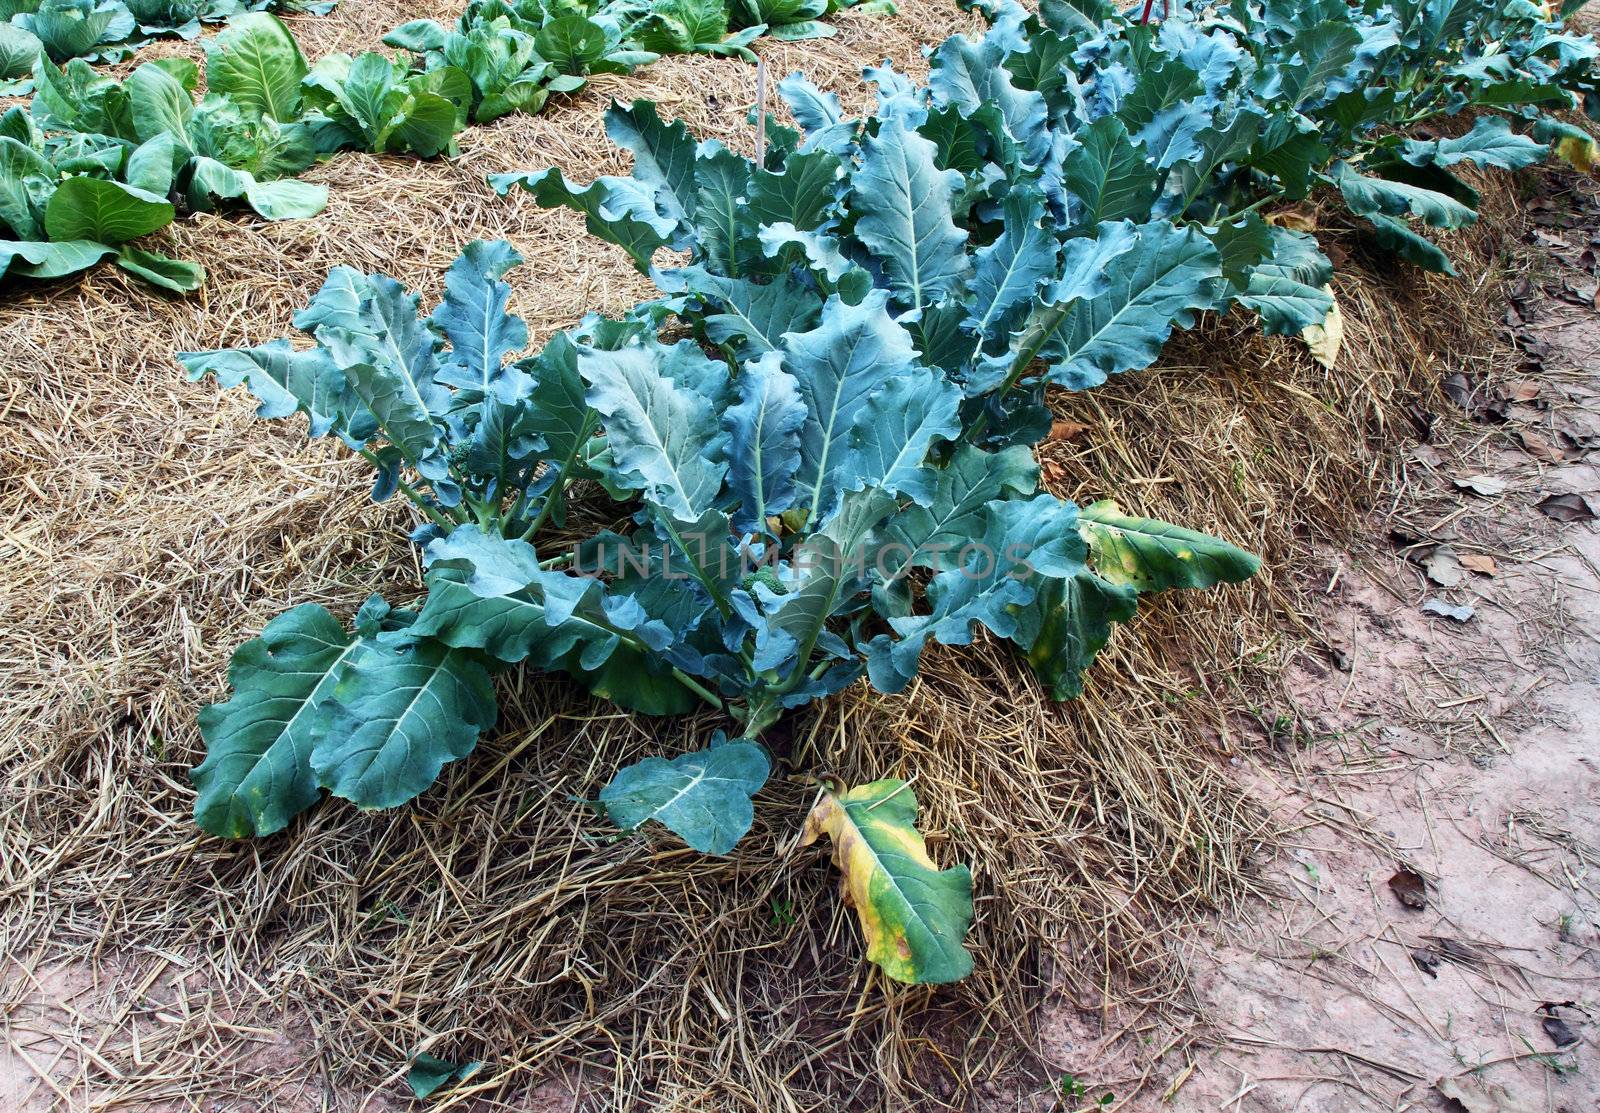 Chinese kale vegetable at a farm by geargodz